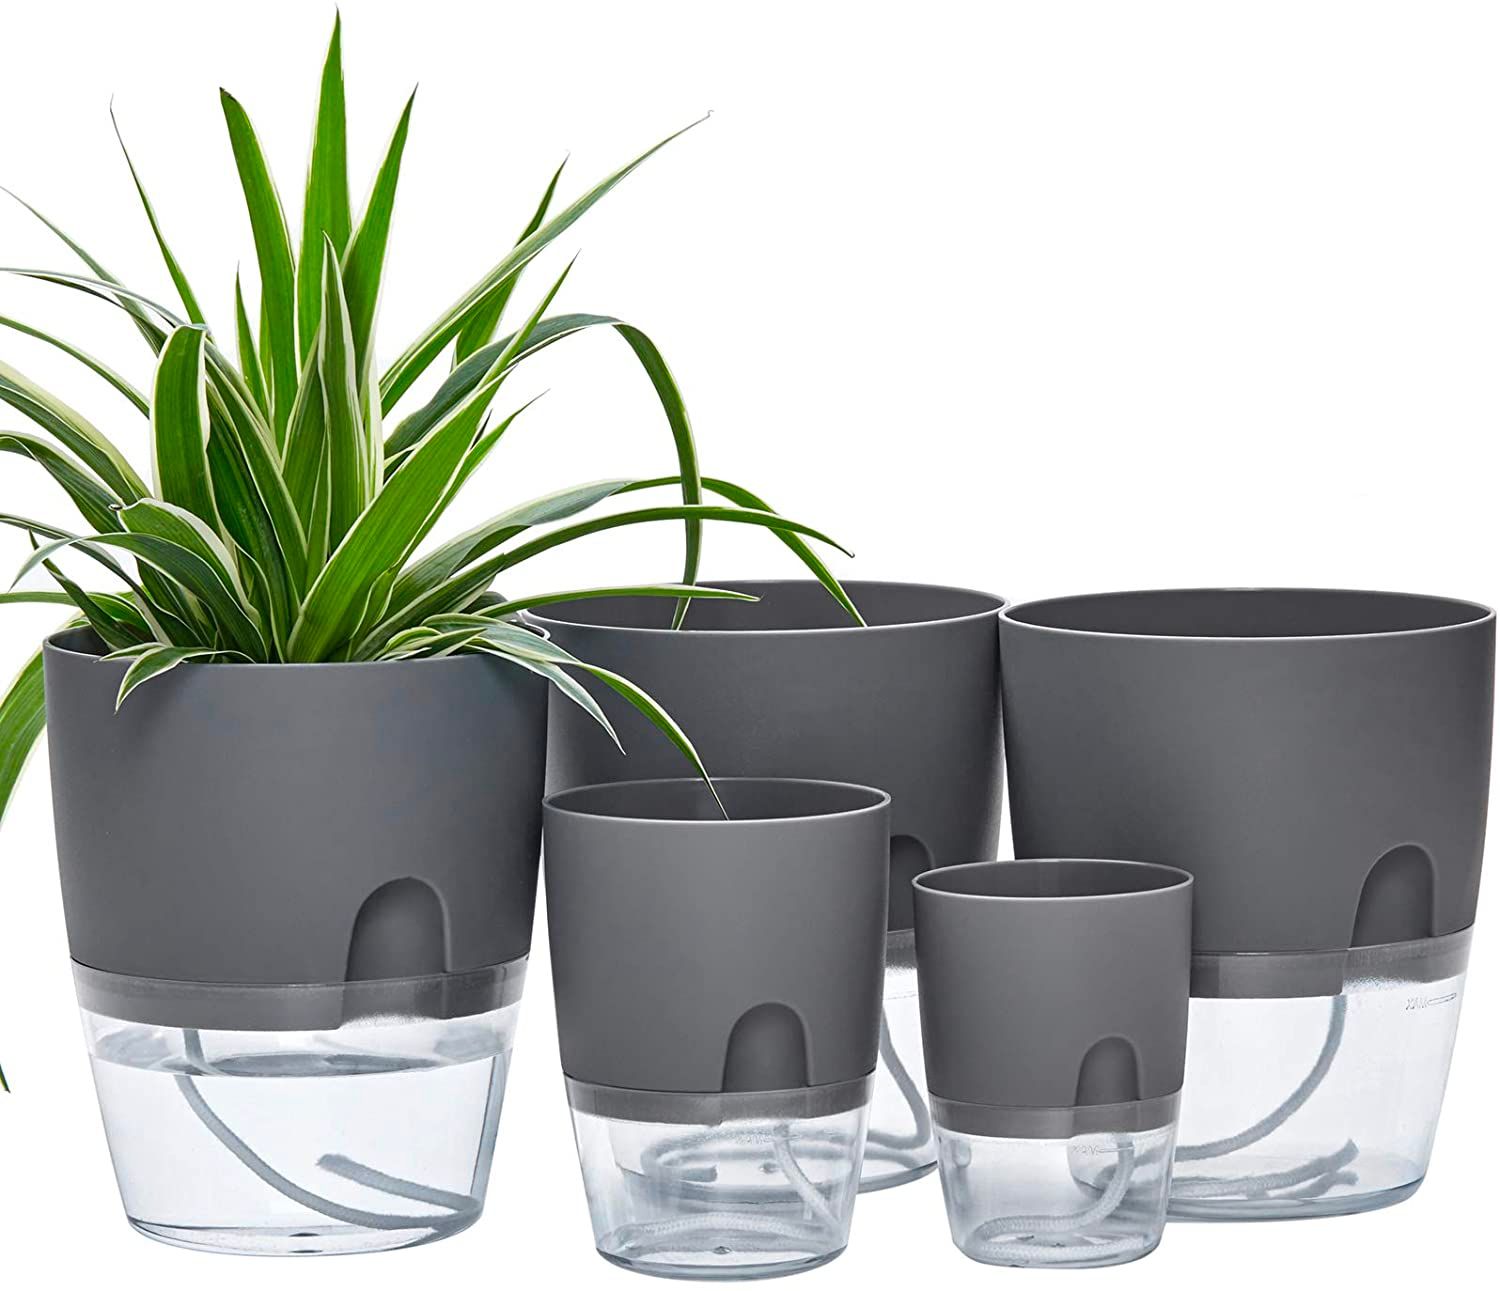 Self-watering planters are a popular type of container for growing plants that provide a convenient and easy way to keep plants hydrated.